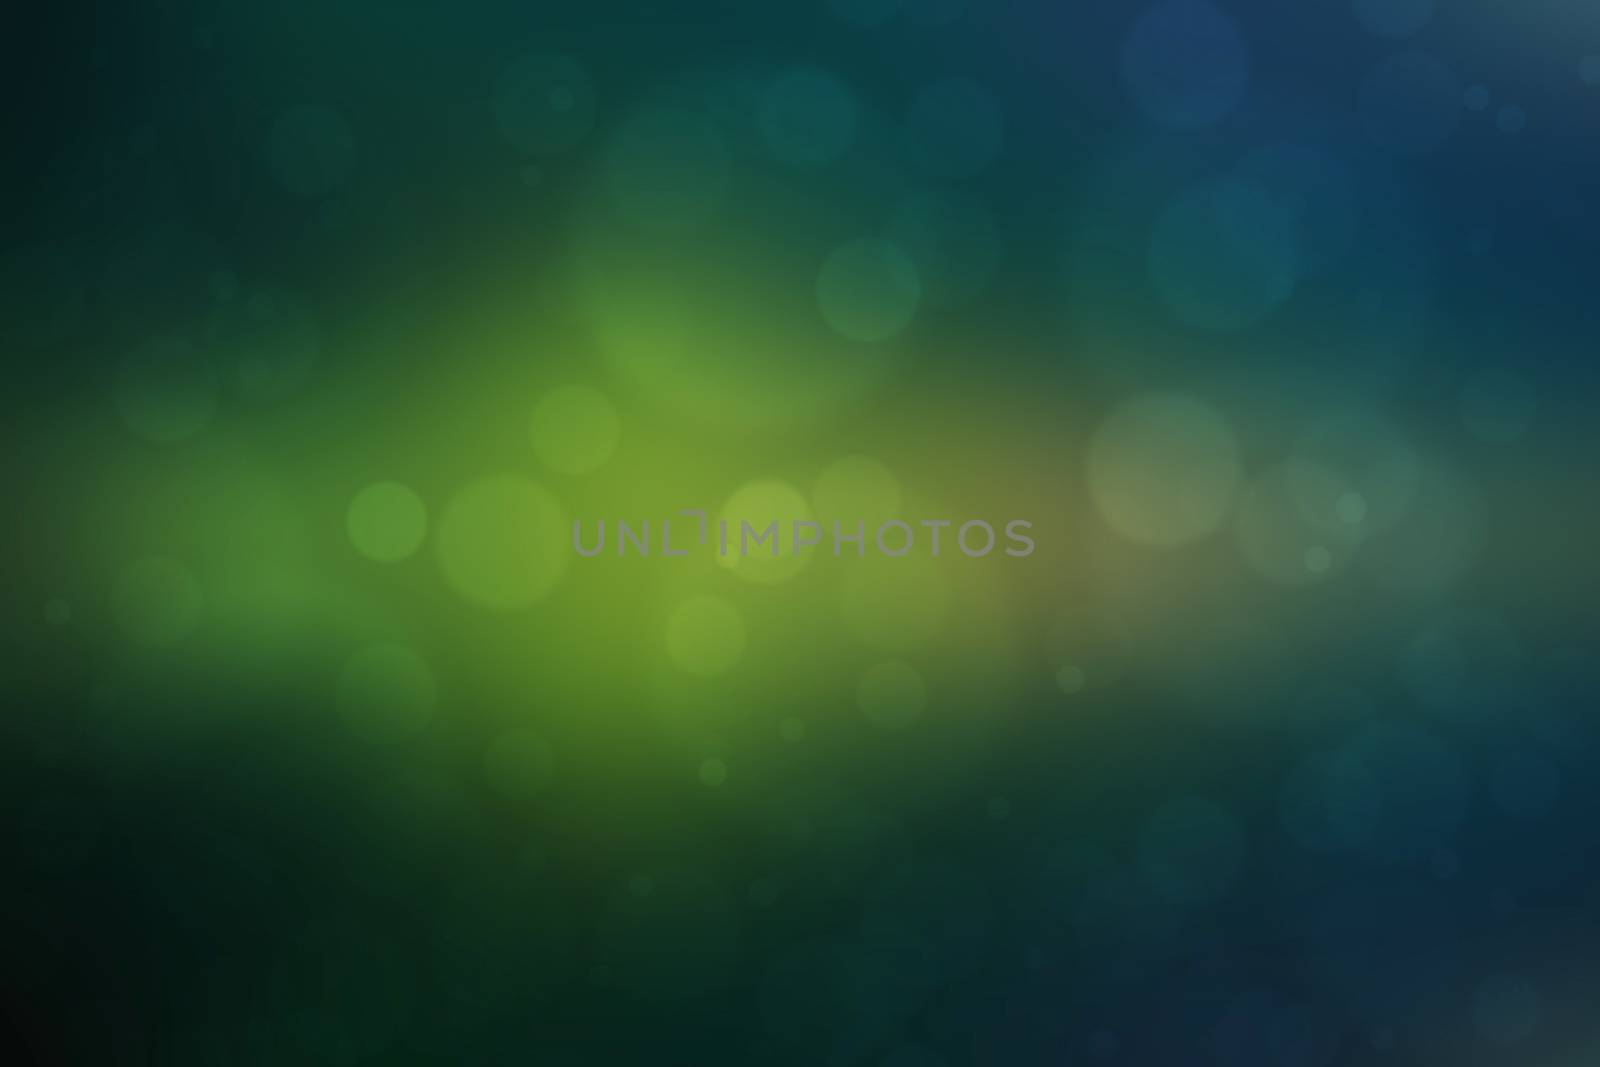  abstract green nature background, bokeh